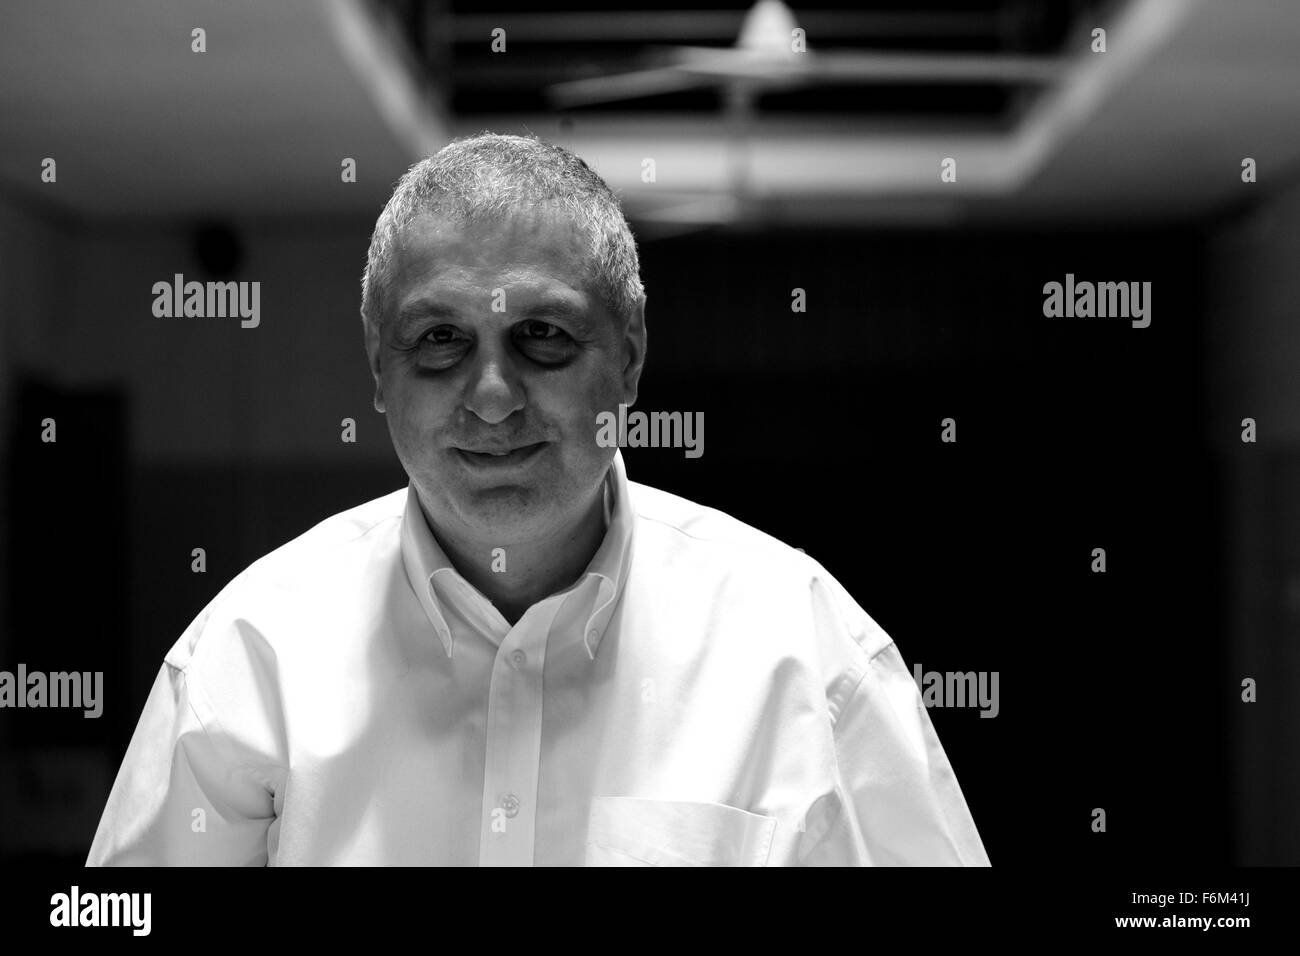 RELEASE DATE: Feb 12, 2008. MOVIE TITLE: Standard Operating Procedure. STUDIO: Sony Pictures Classics. PLOT: Errol Morris examines the incidents of abuse and torture of suspected terrorists at the hands of U.S. forces at the Abu Ghraib prison. PICTURED: Director ERROL MORRIS. Stock Photo